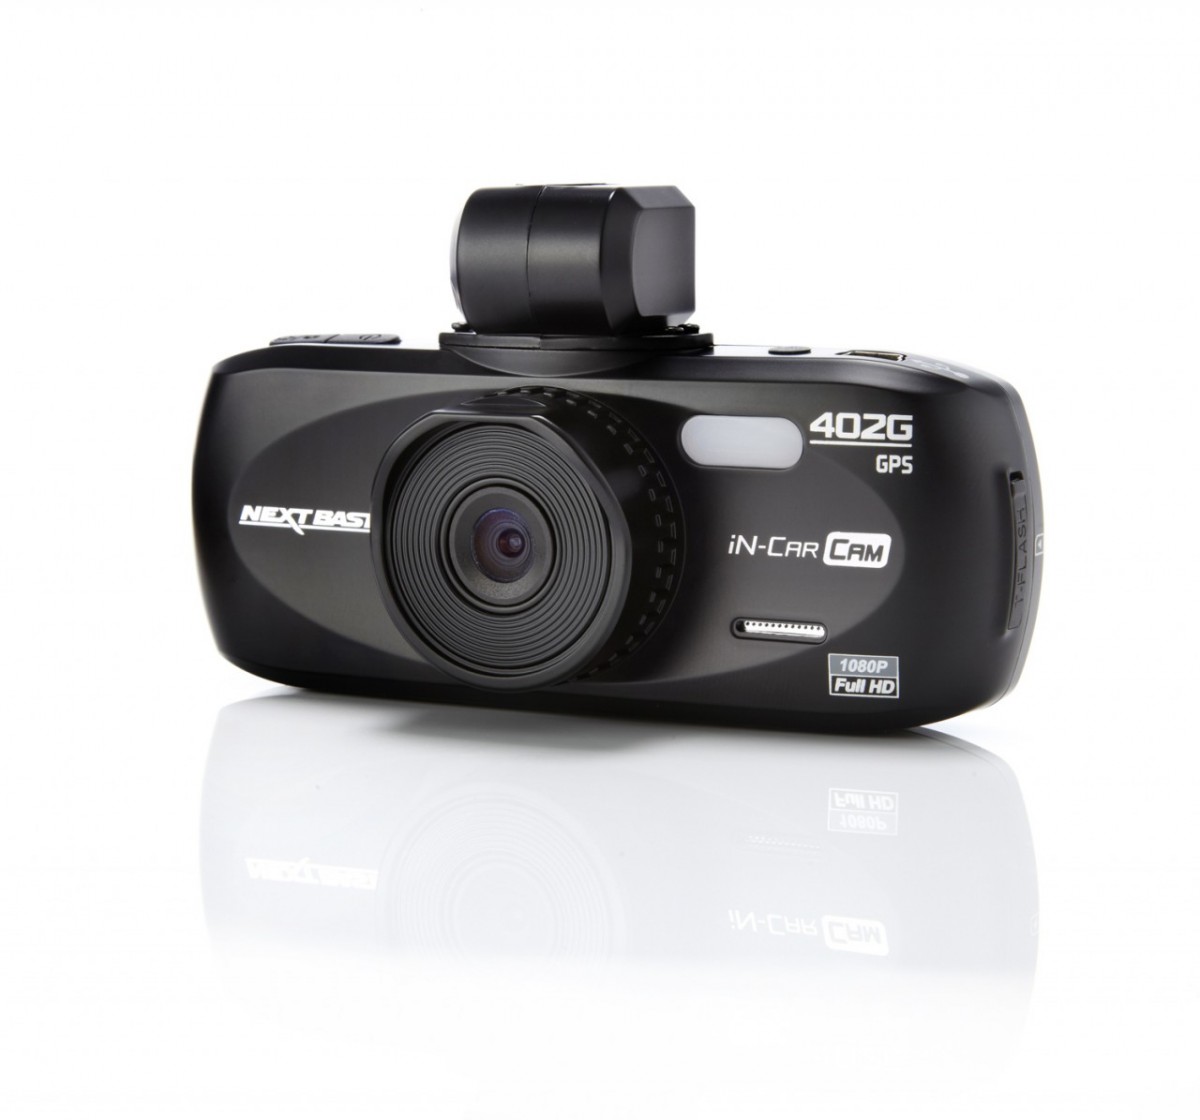 The Sunday Times Driving rated the Nextbase In-Car Cam 402 Professional as the best in-car dashcam for over £100